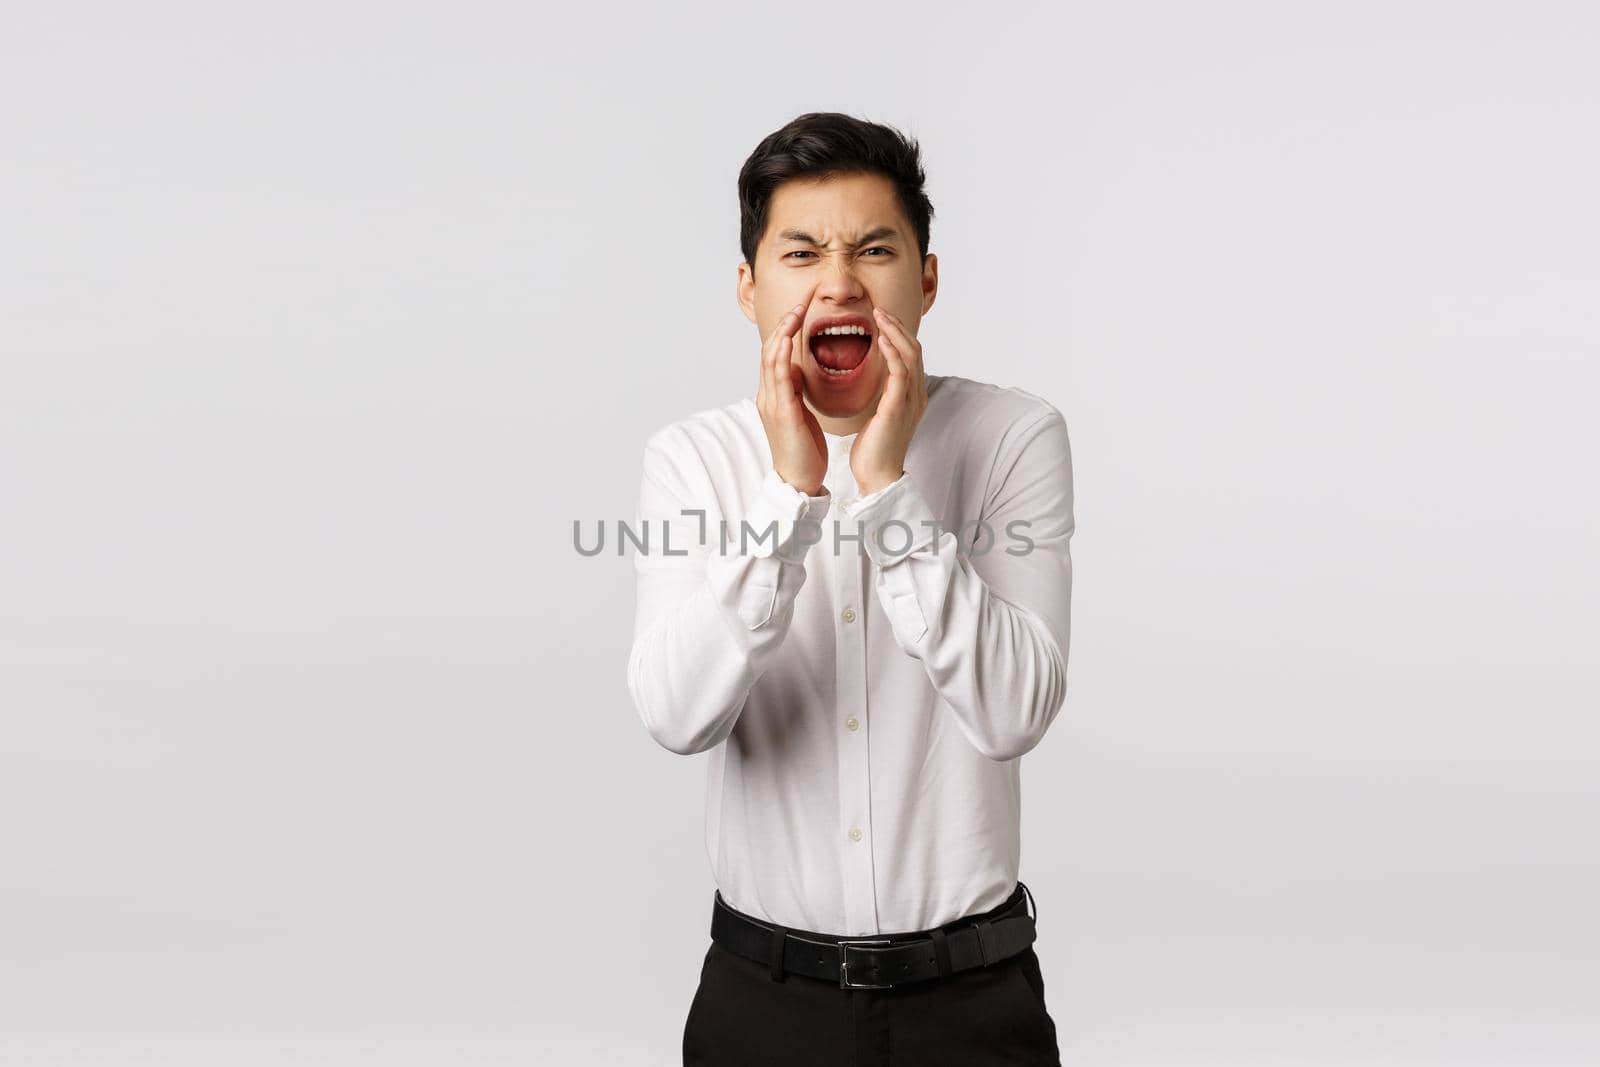 Guy swearing and yelling out loud cursing words. Angry, outraged and displeased asian man hold hands near opened mouth like megaphone, shouting at someone arguing or having fight, white background.